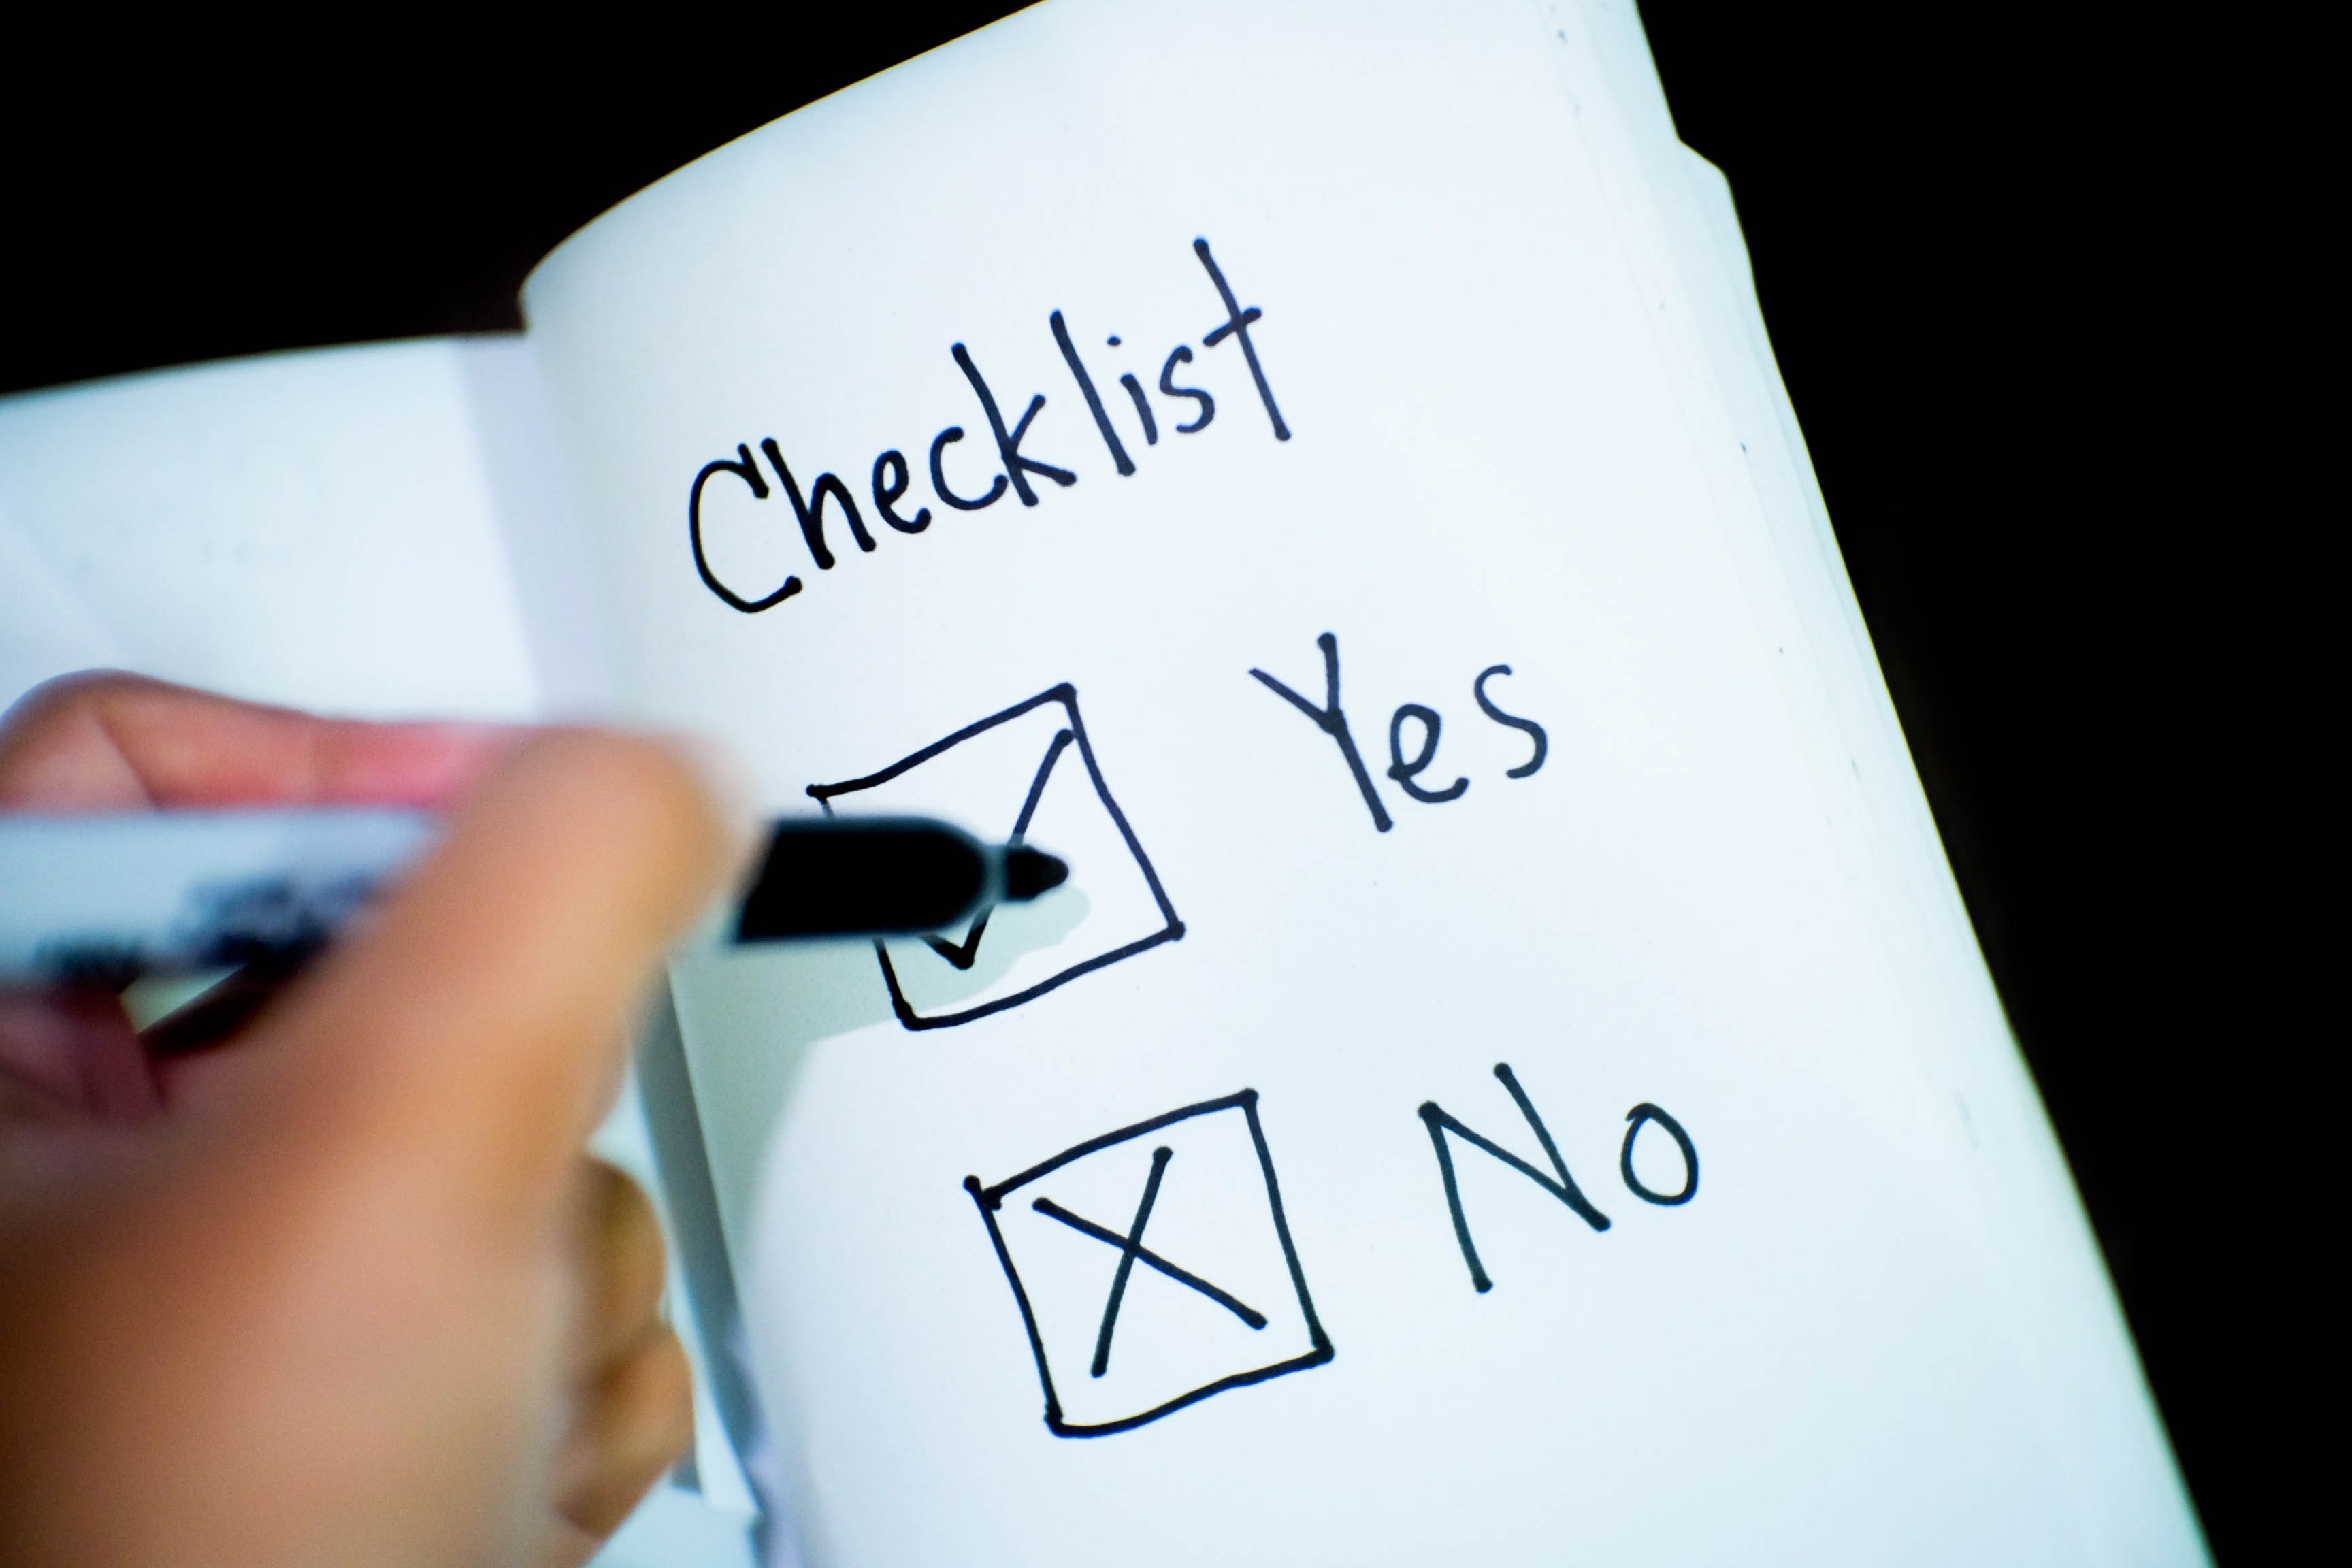 Checklists are a special form of ToDo list which can help clarity.